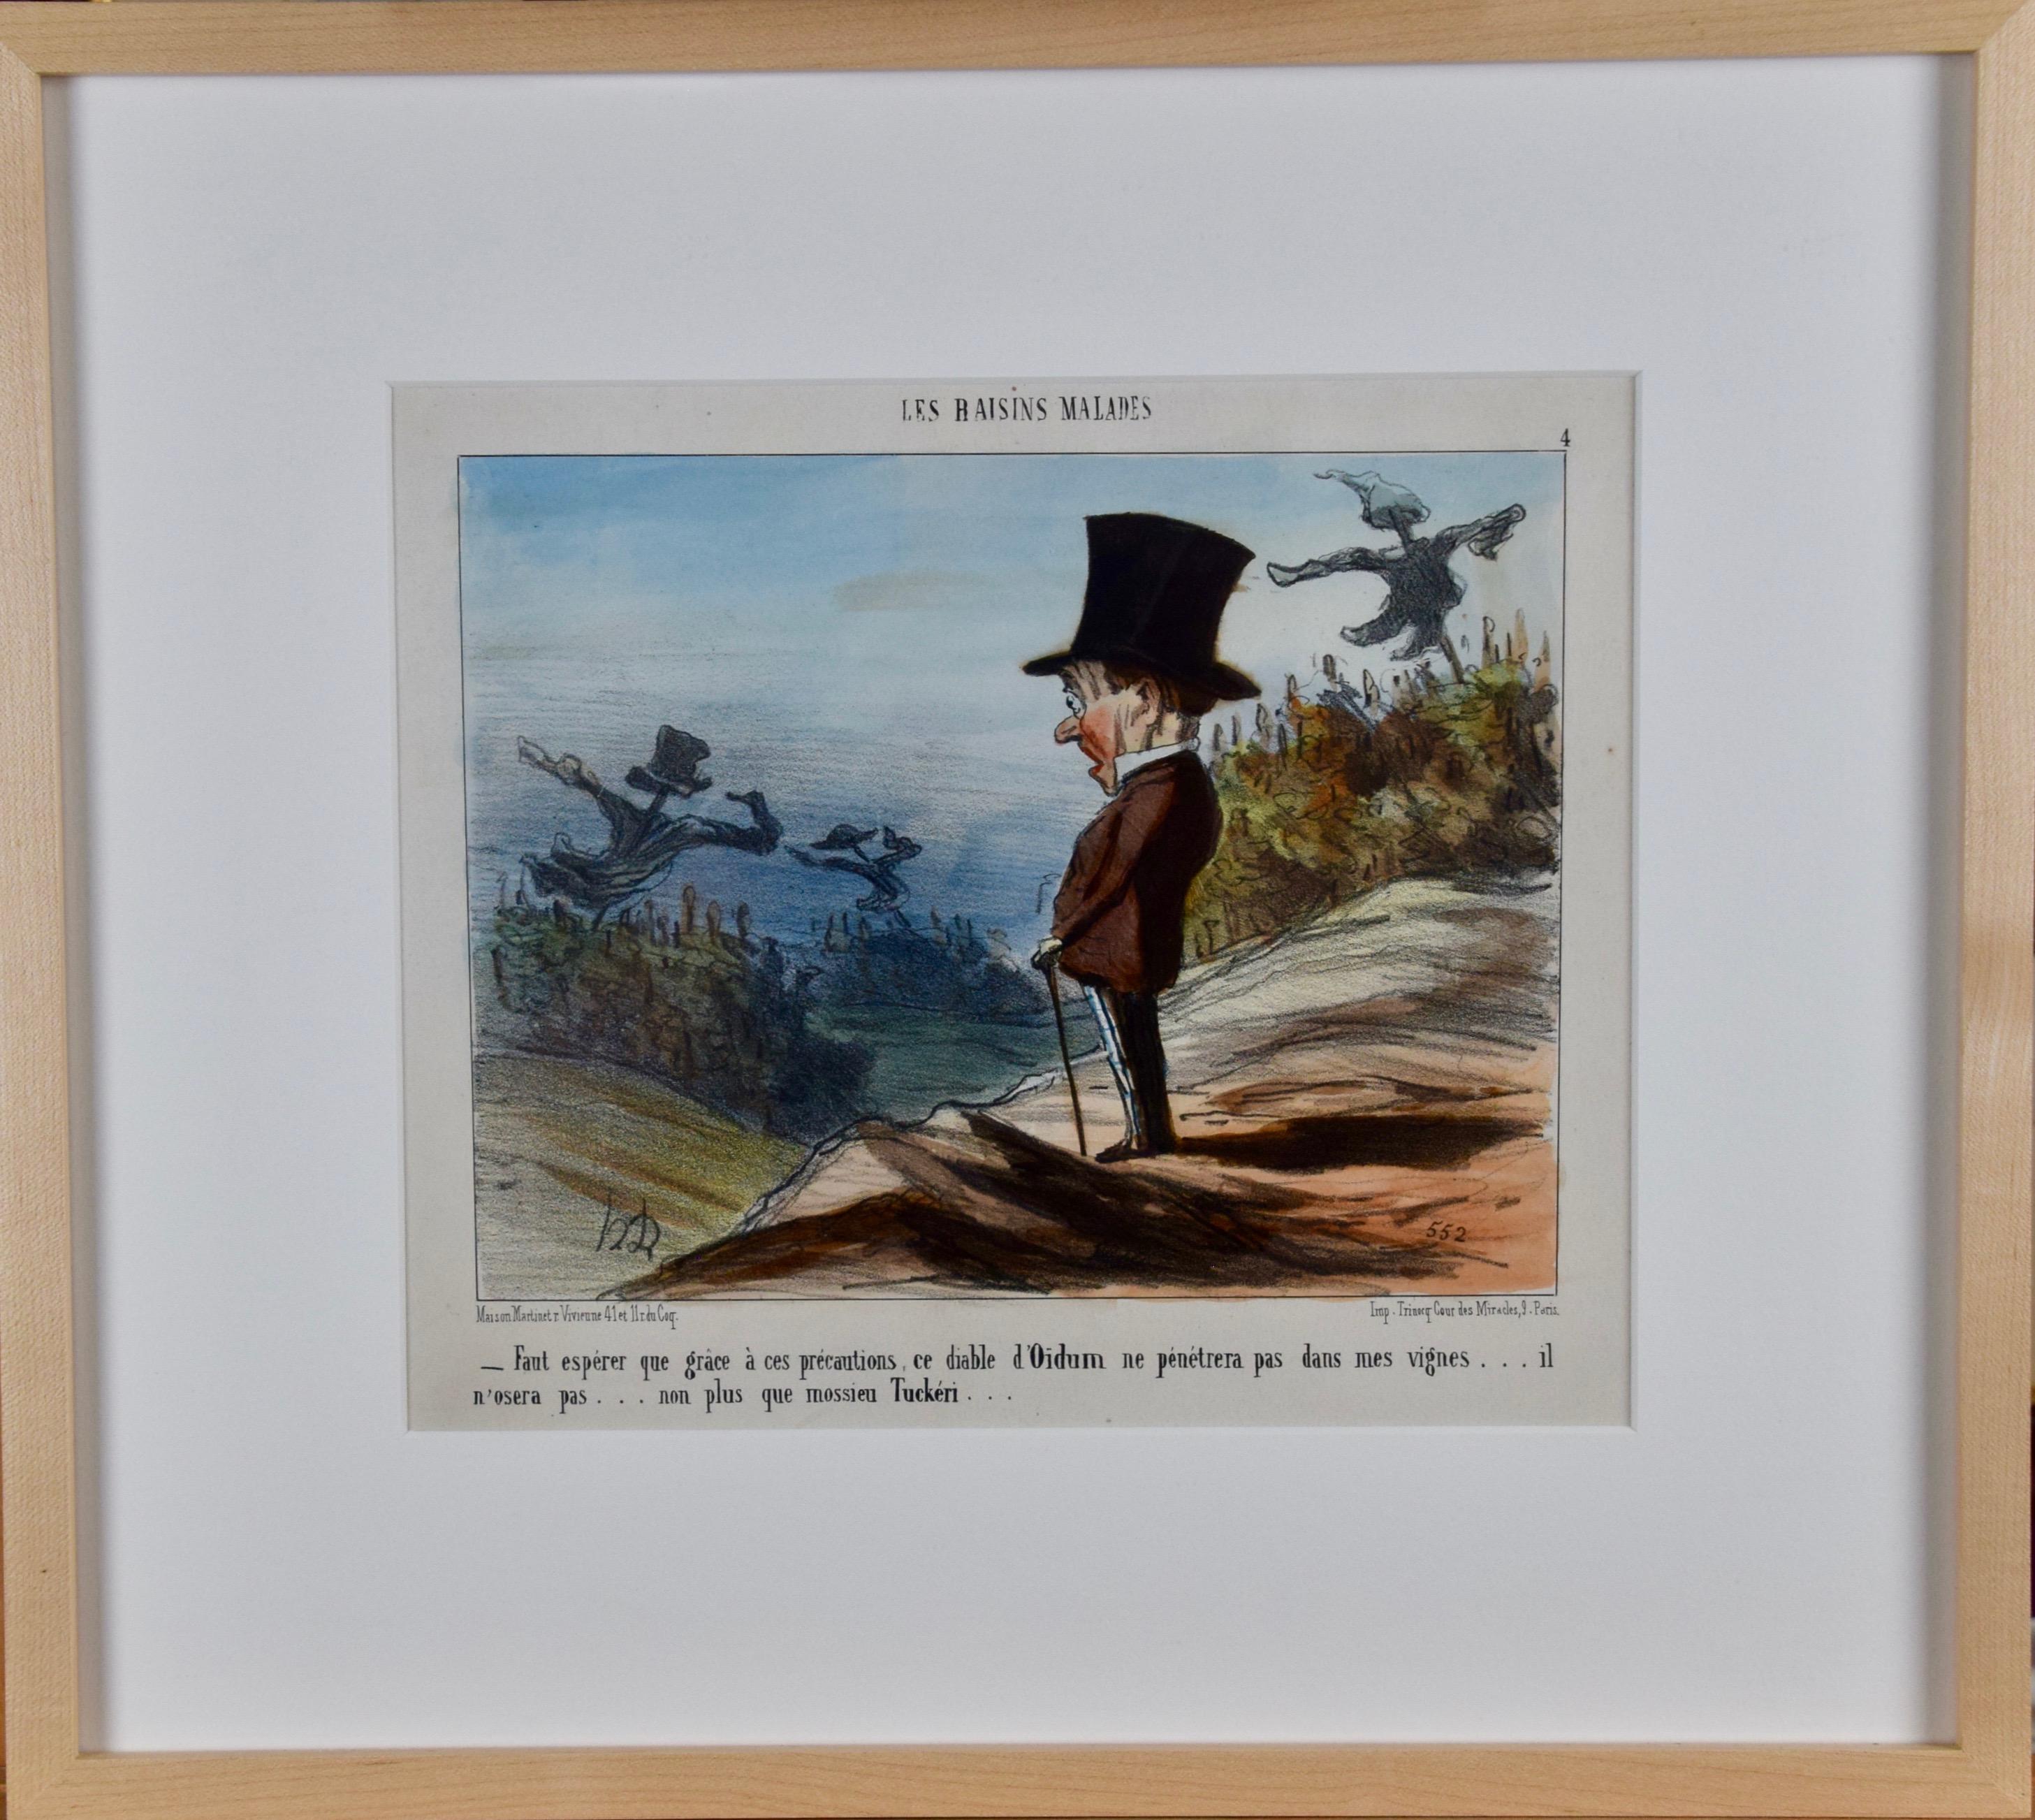 Daumier Colored Lithographic Satire of a Man Concerned for His Vineyard and Wine